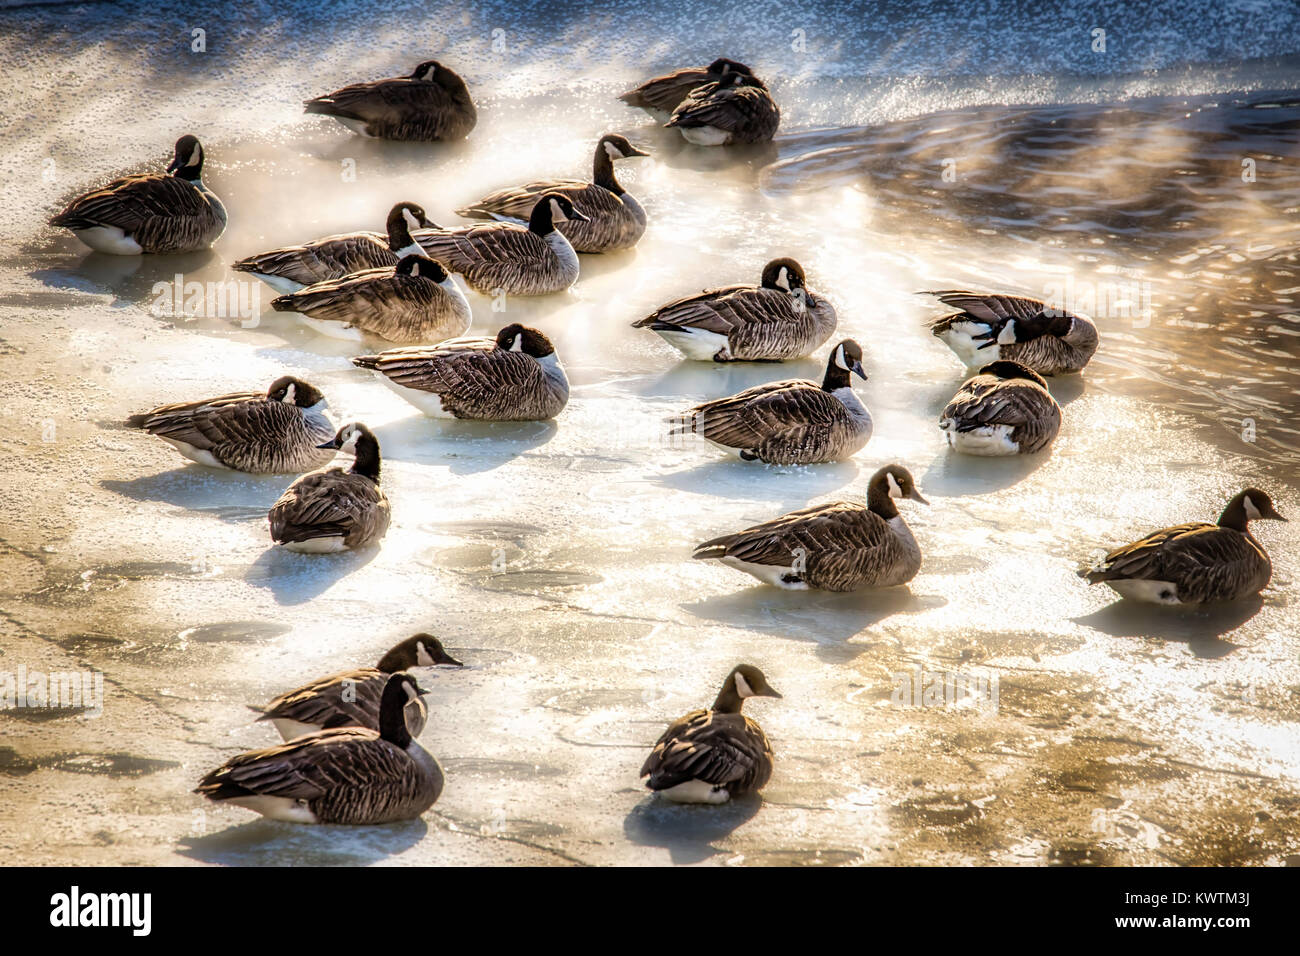 Canadian Geese basking in the steam from a pond during a subzero Wisconsin winter day. Stock Photo